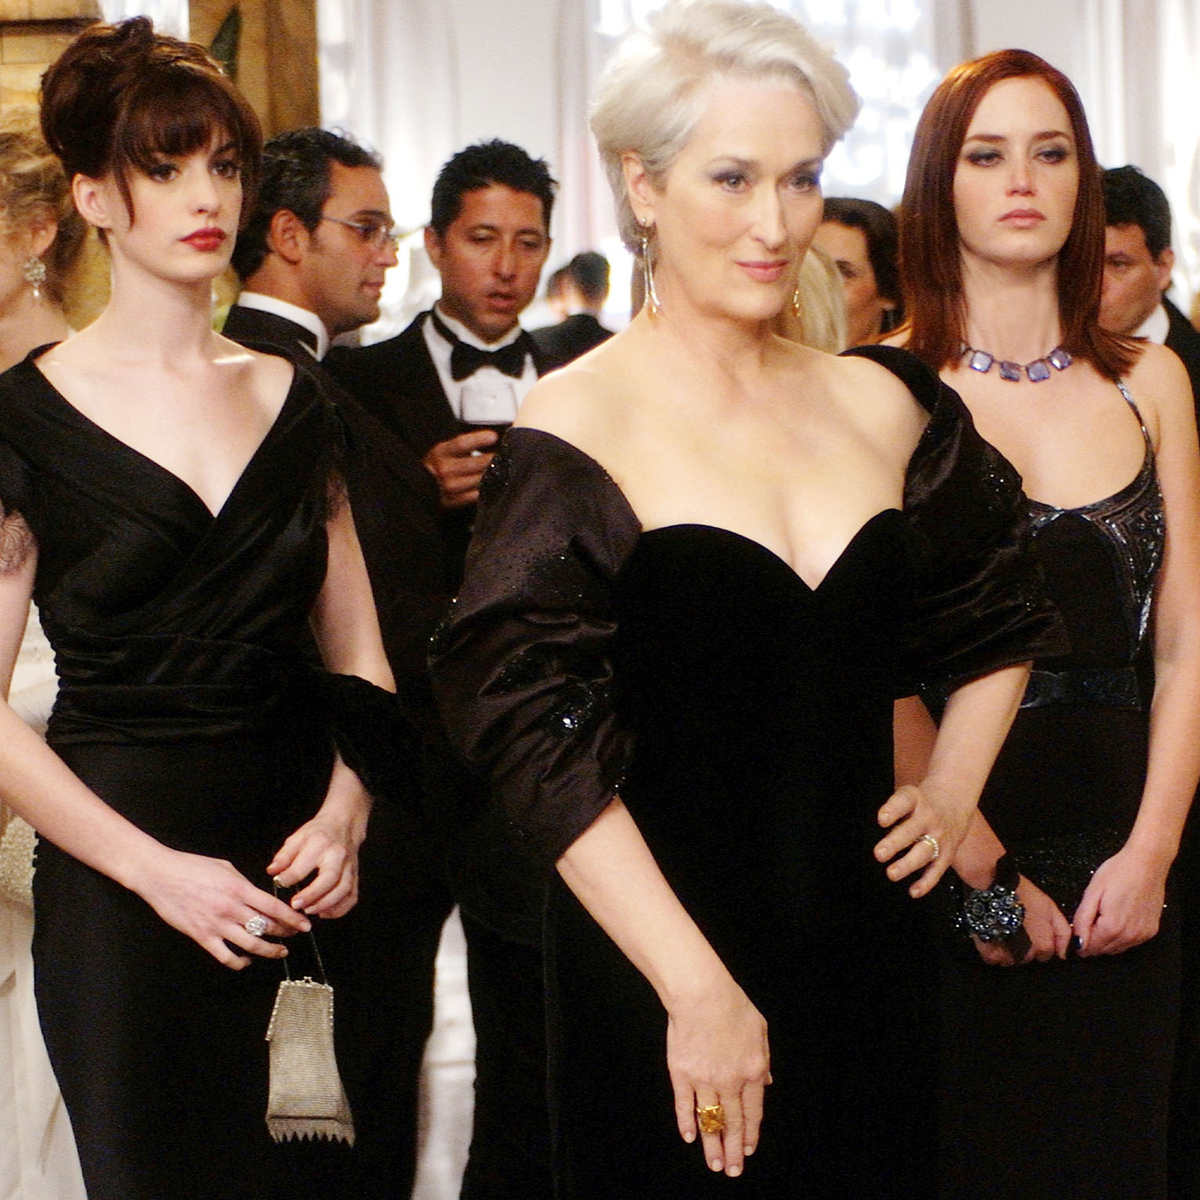 The Devil Wears Prada Is Officially Getting a Sequel After 18 Years